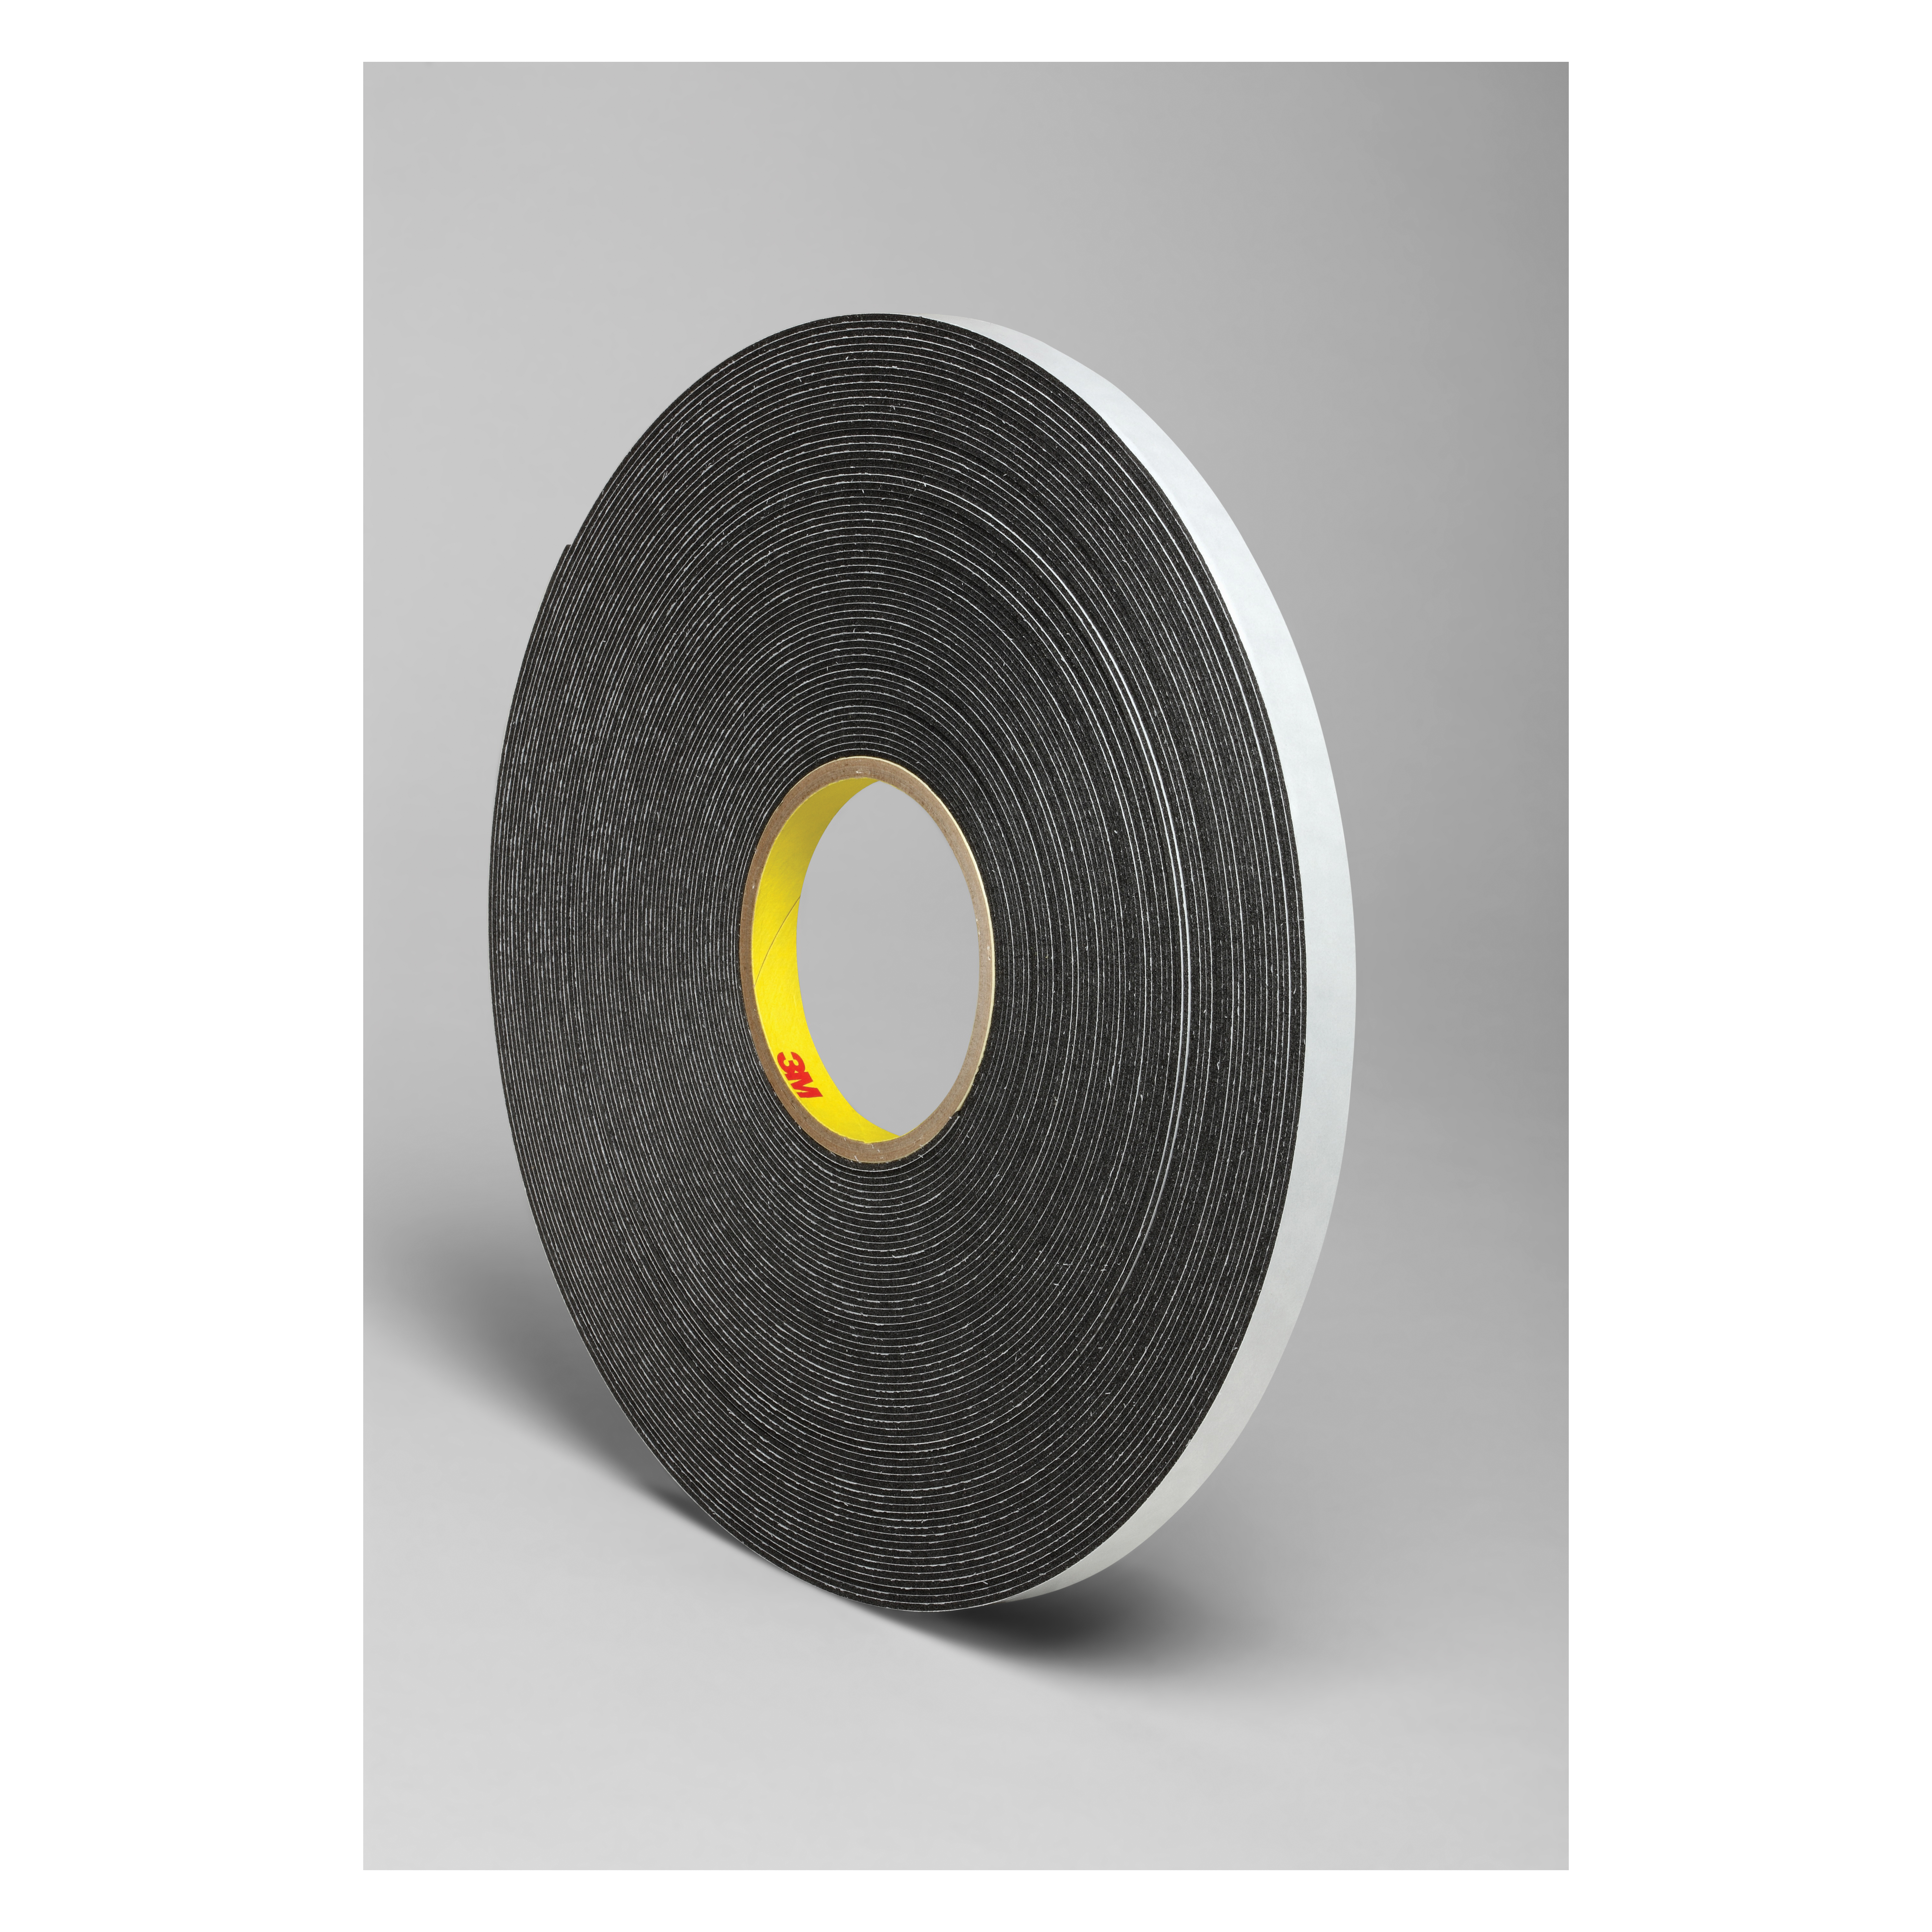 3M™ 021200-30412 Double Coated Tape, 36 yd L x 3/4 in W, 62 mil THK, Rubber Adhesive, Polyethylene Foam Backing, Black